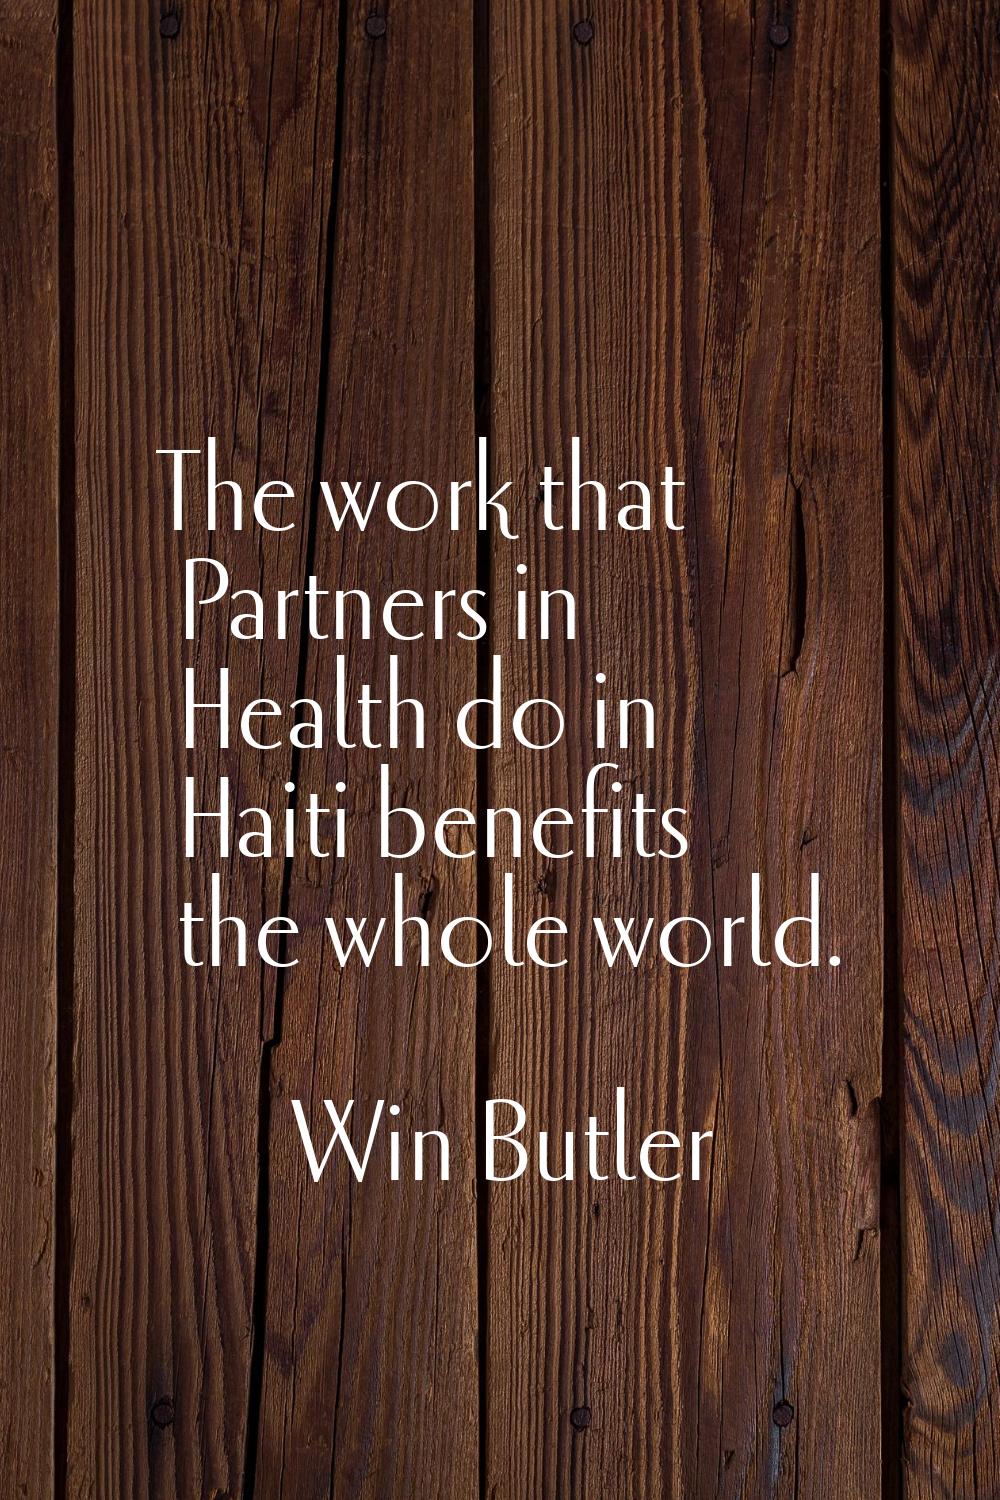 The work that Partners in Health do in Haiti benefits the whole world.